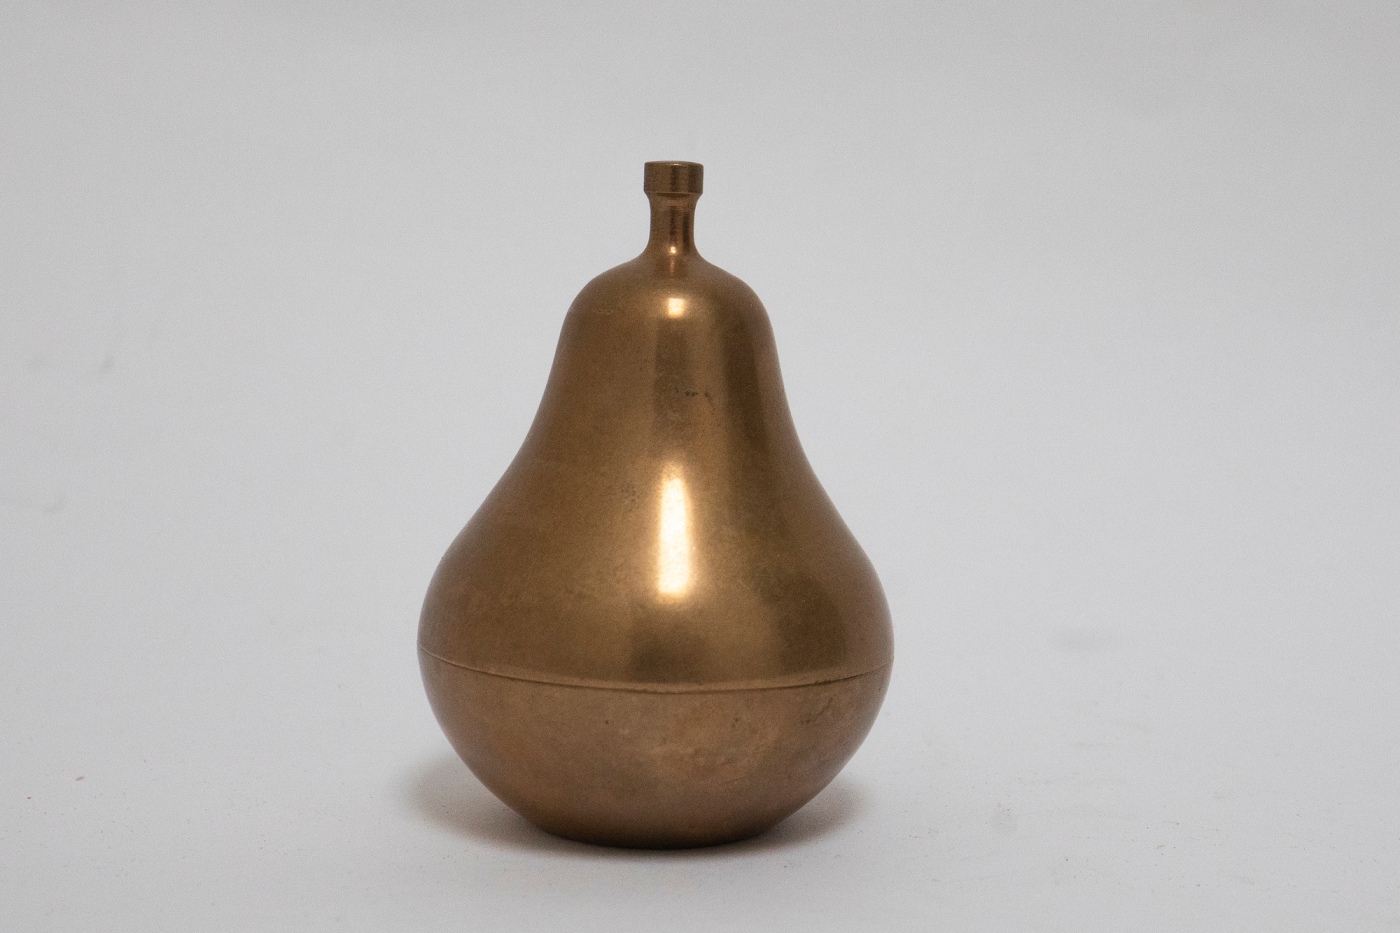 Small vintage pear shaped box in brass